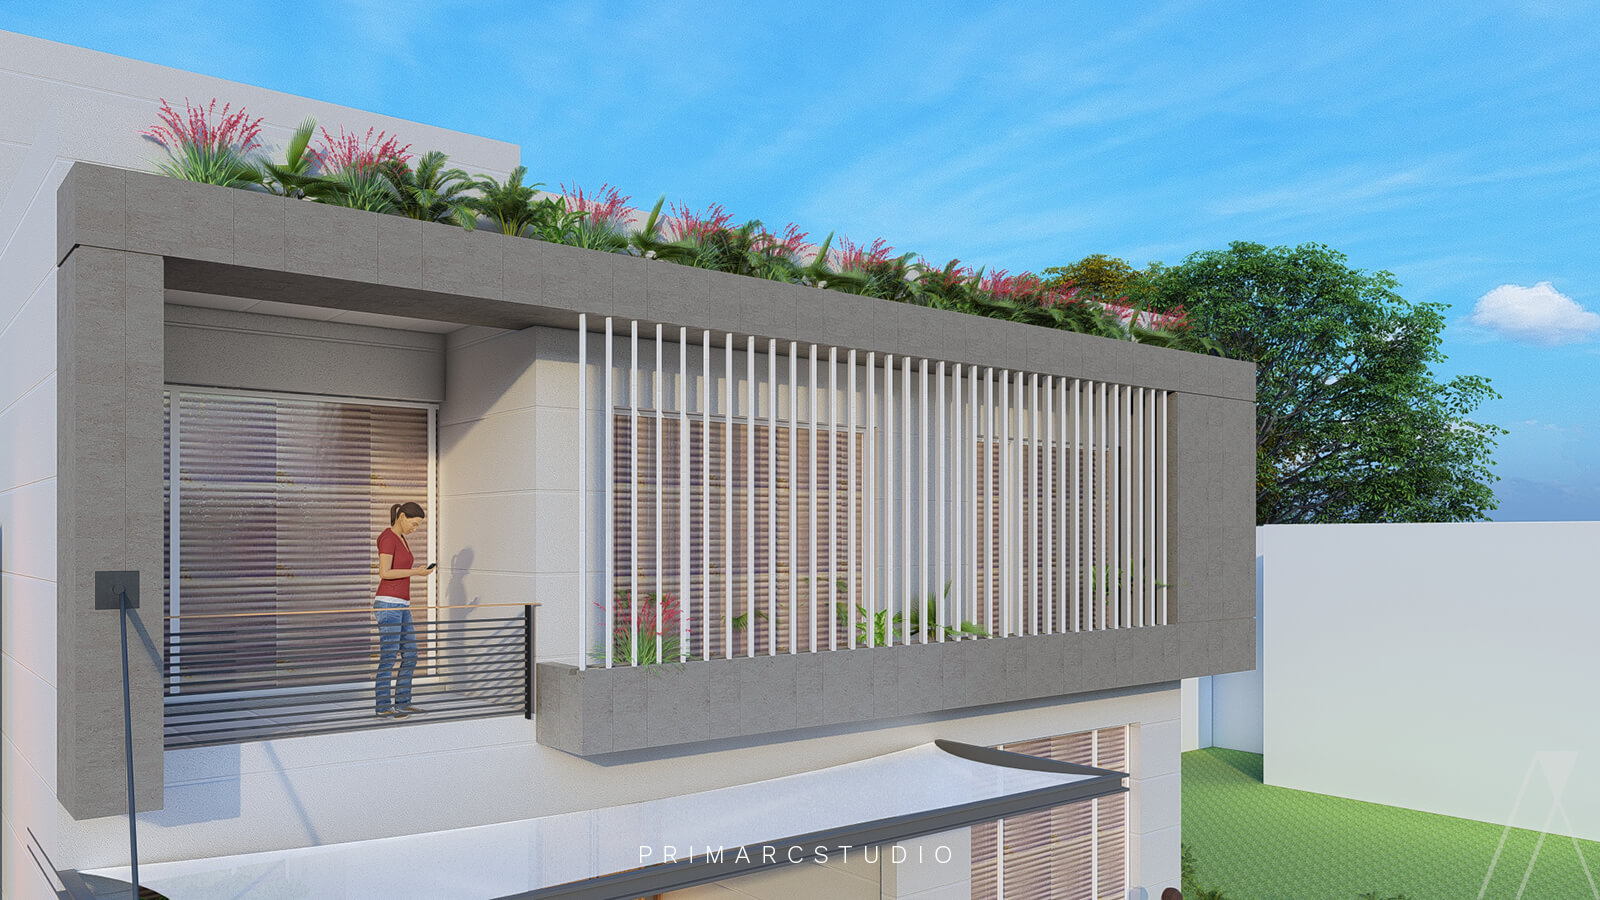 Exterior design of house with louvers and balcony